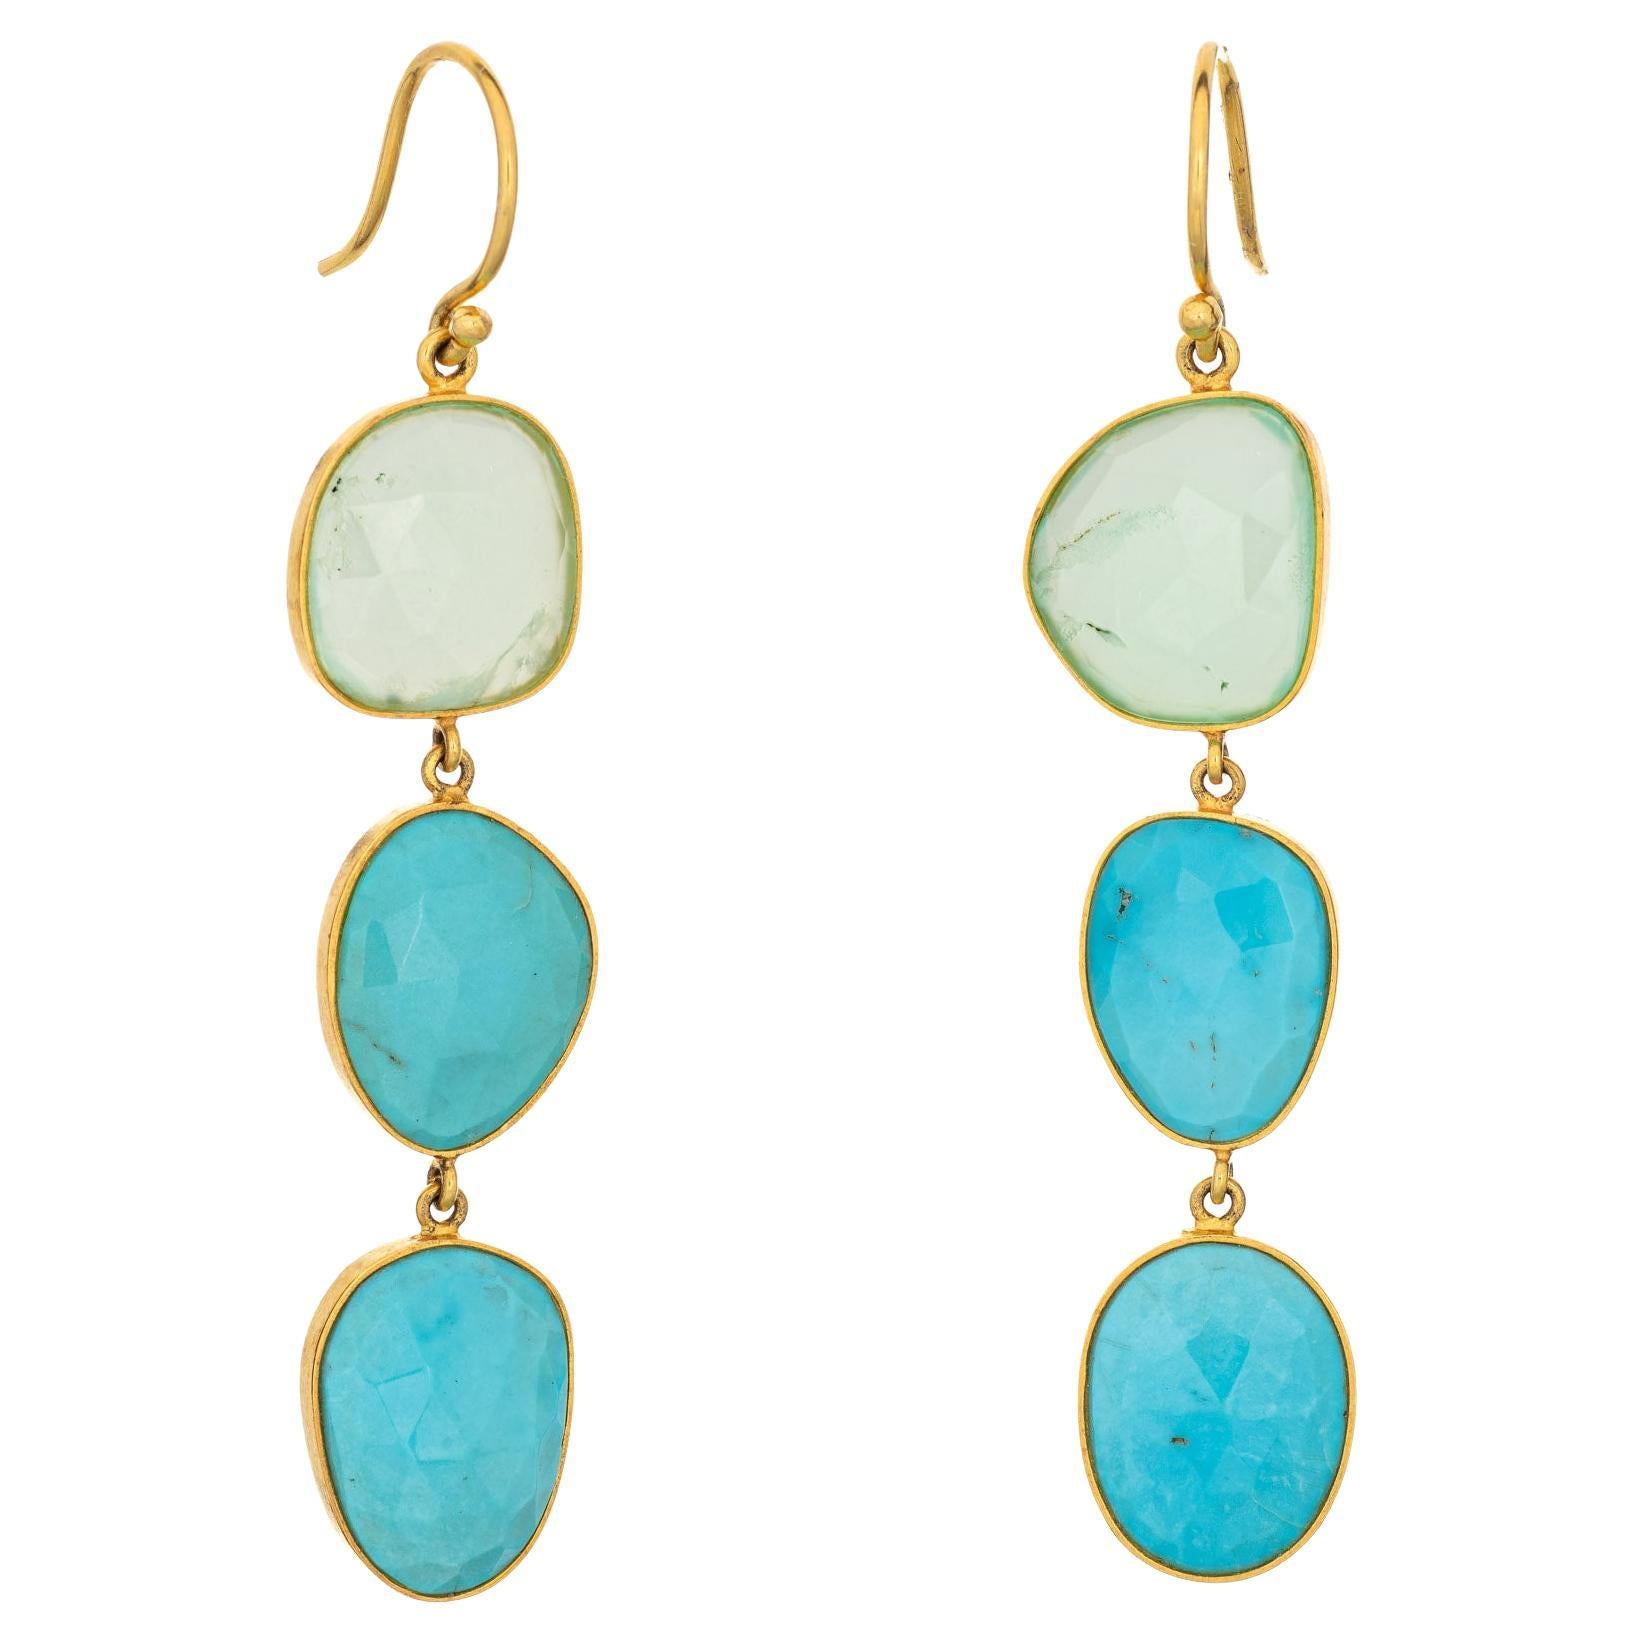 Turquoise Green Chalcedony Earrings Estate 14k Yellow Gold 2.25" Drops Jewelry For Sale